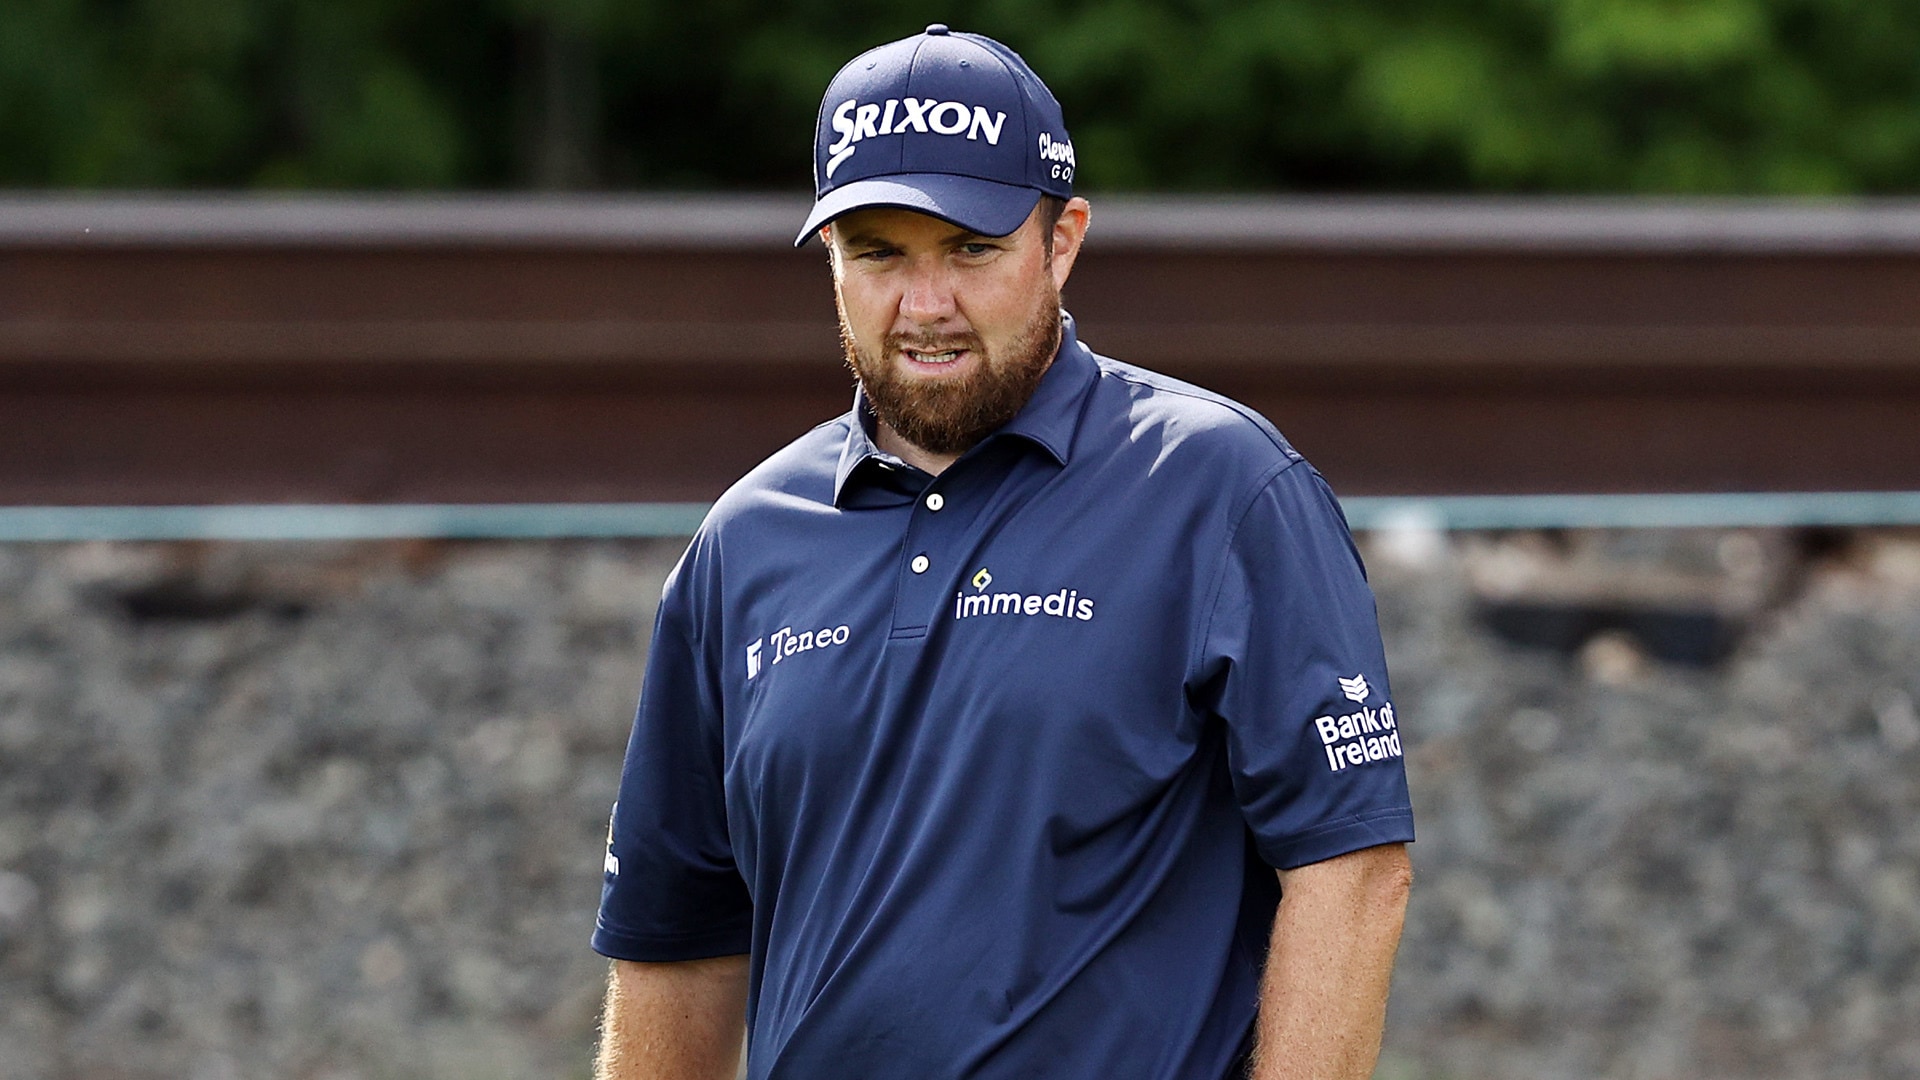 Shane Lowry ‘cautious’ after playing practice rounds with McDowell, Koepkas